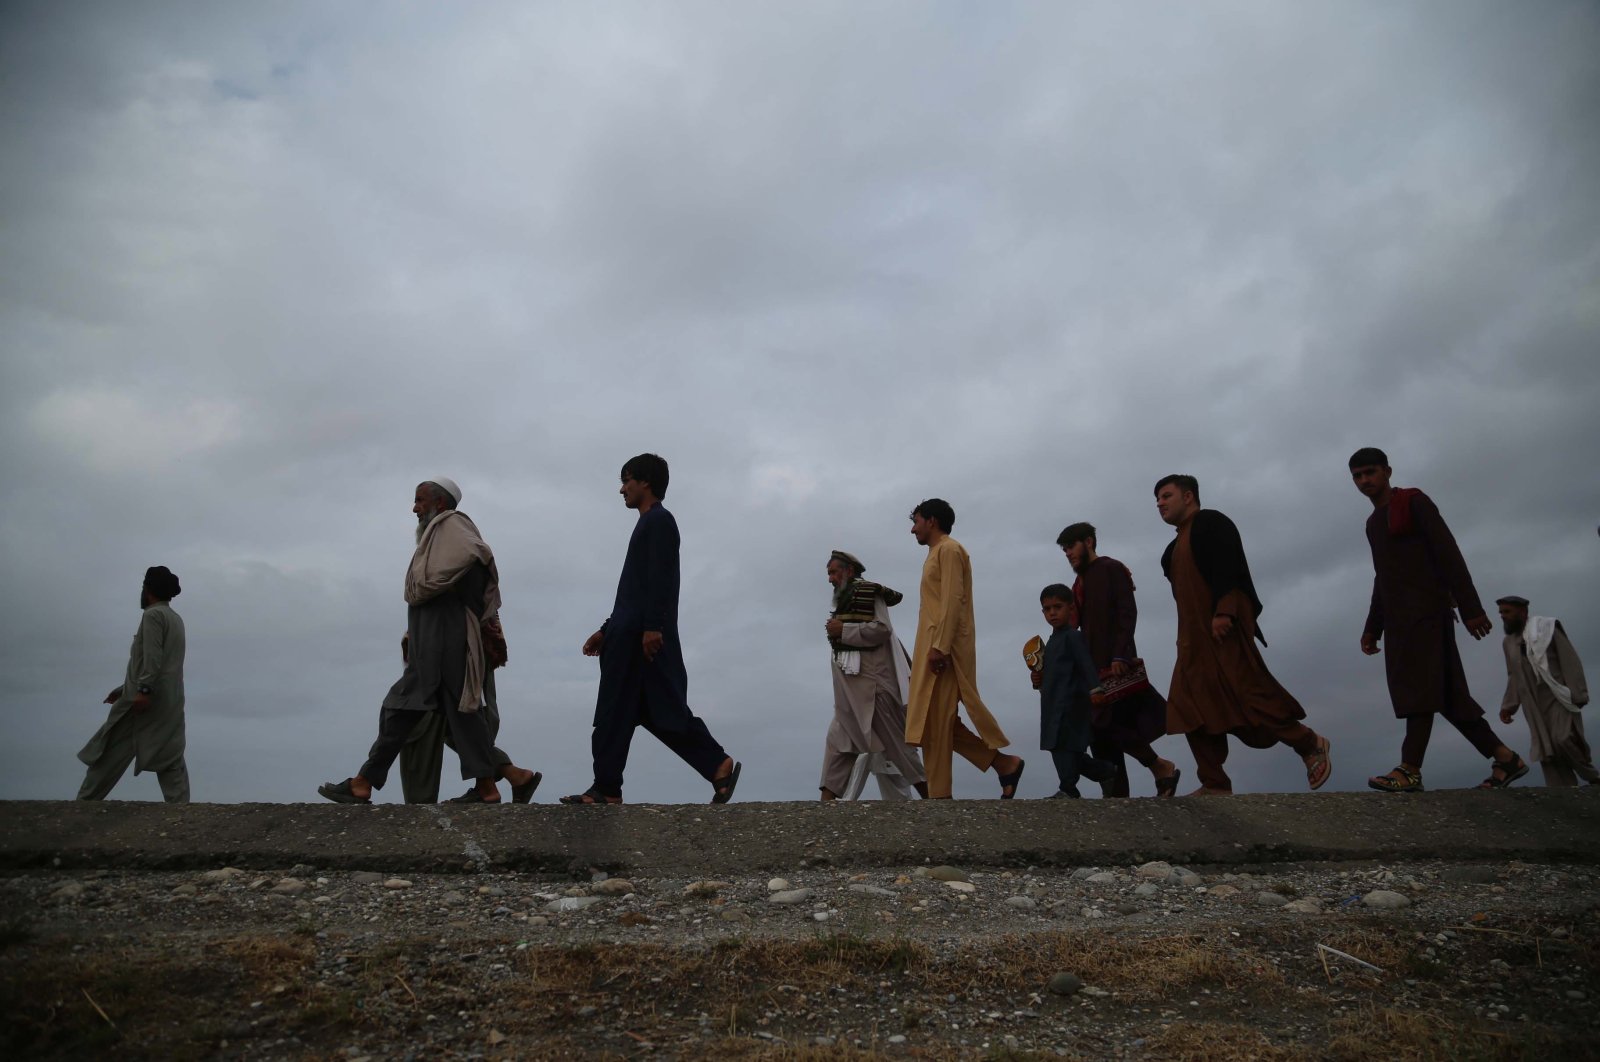 Afghans arrive to offer Qurban Bayram, also known as Eid al-Adha, prayers in the Sarhood district of Nangarhar province, Afghanistan, July 20, 2021. (EPA Photo)